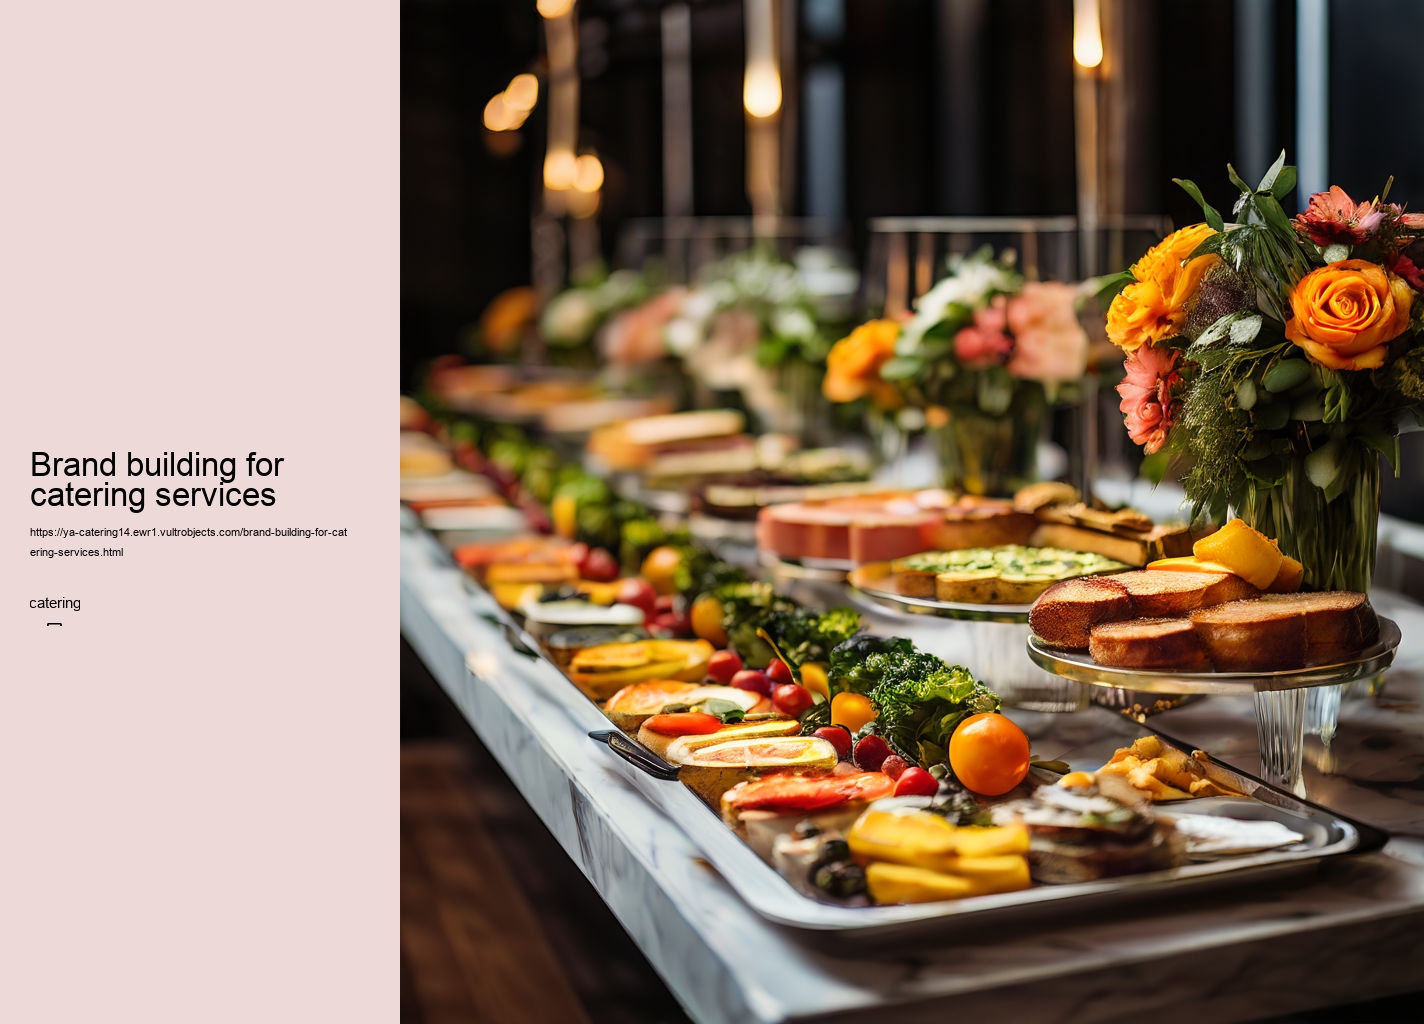 Brand building for catering services